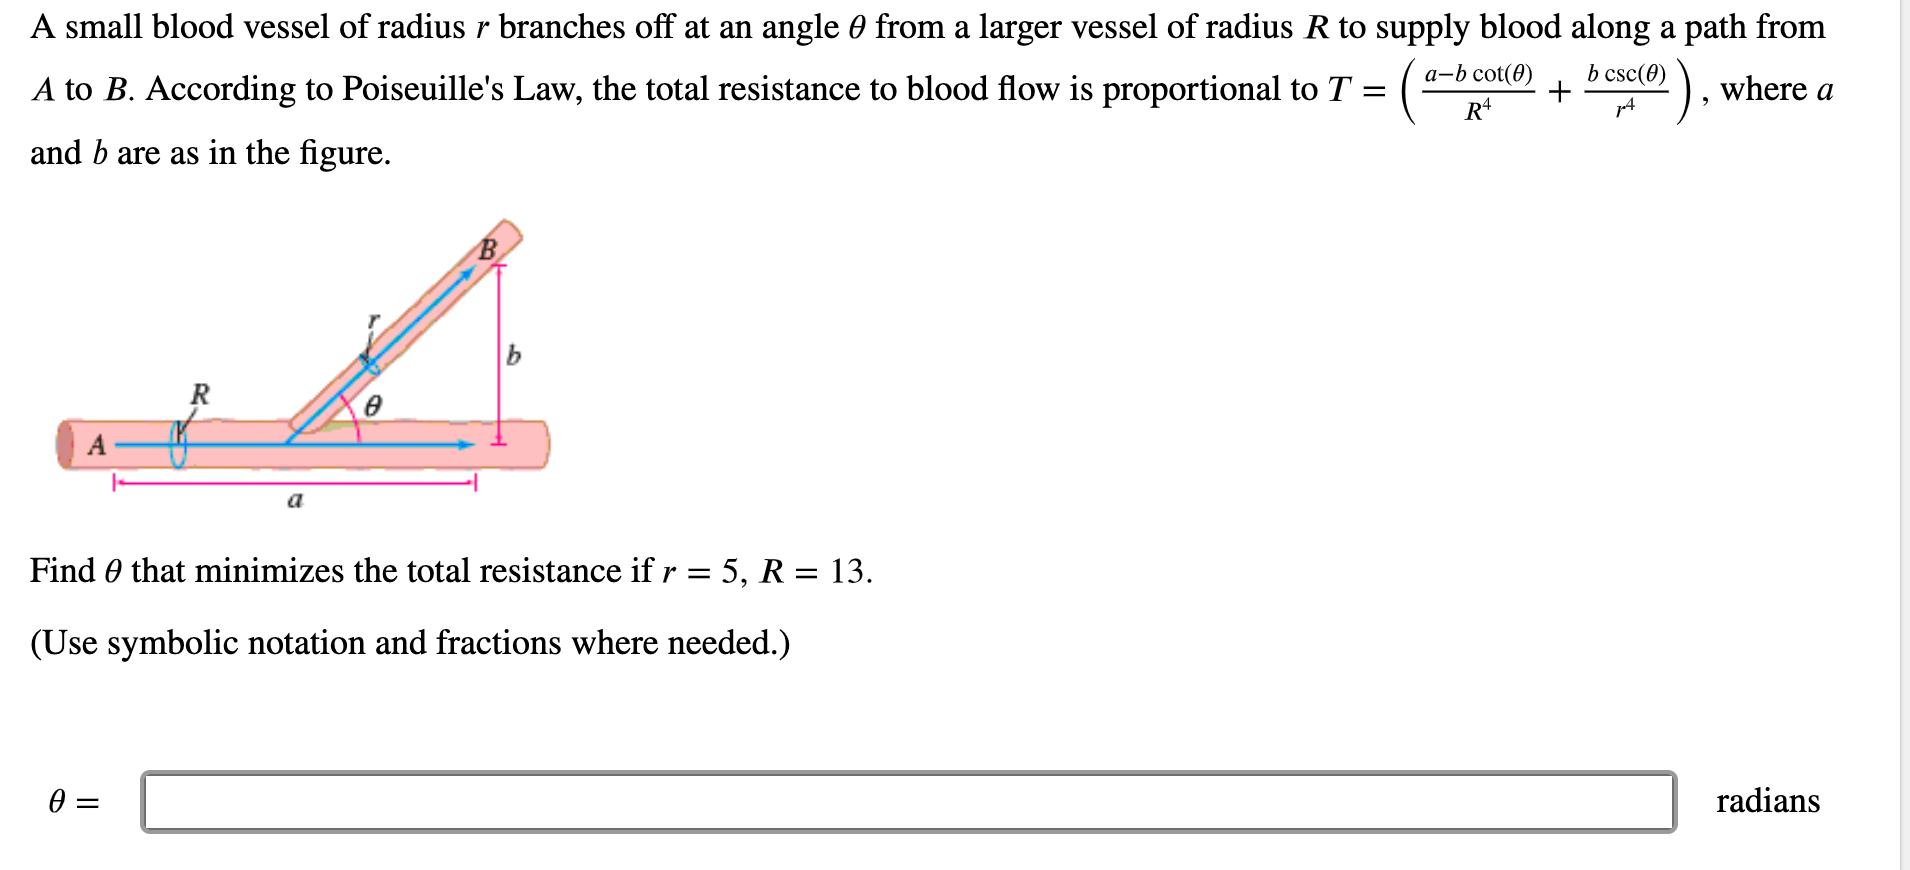 A small blood vessel of radius r branches off at an angle 0 from a larger vessel of radius R to supply blood along a path from
а-b cot(0)
b csc(0)
A to B. According to Poiseuille's Law, the total resistance to blood flow is proportional to T = ( -
where a
and b are as in the figure.
В.
ь
R
Find 0 that minimizes the total resistance if r = 5, R = 13.
(Use symbolic notation and fractions where needed.)
radians
